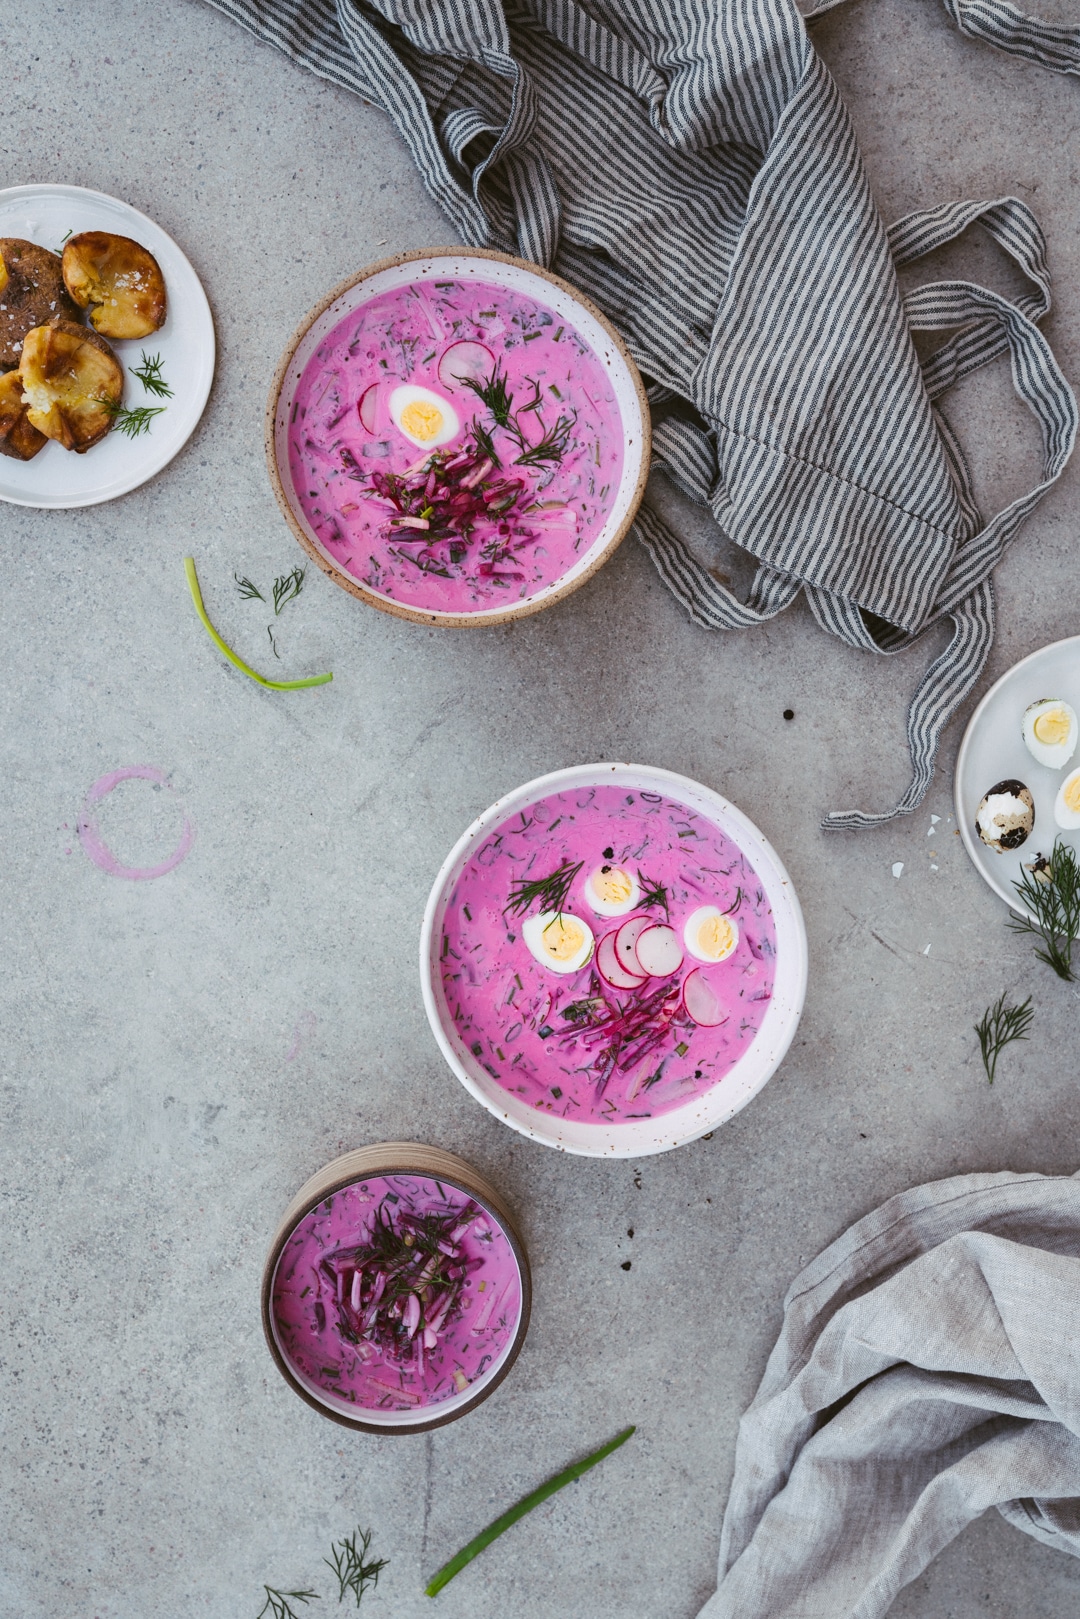 Lithuanian Cold Beetroot Soup